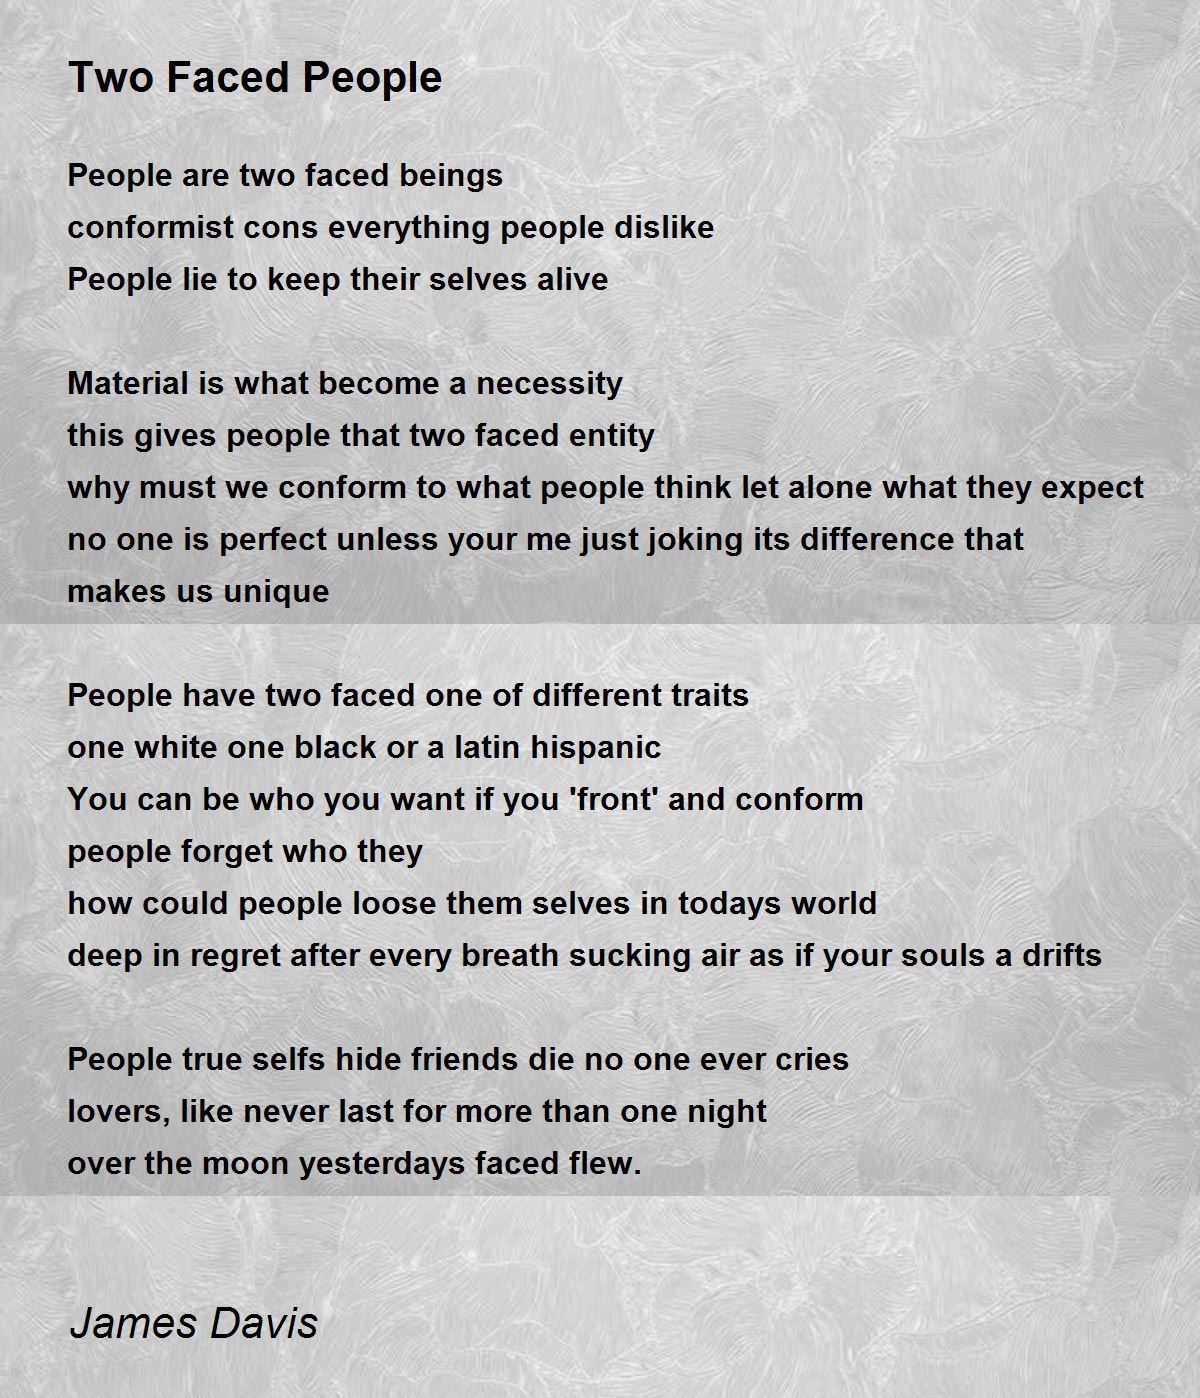 Two Faced People - Two Faced People Poem by James Davis